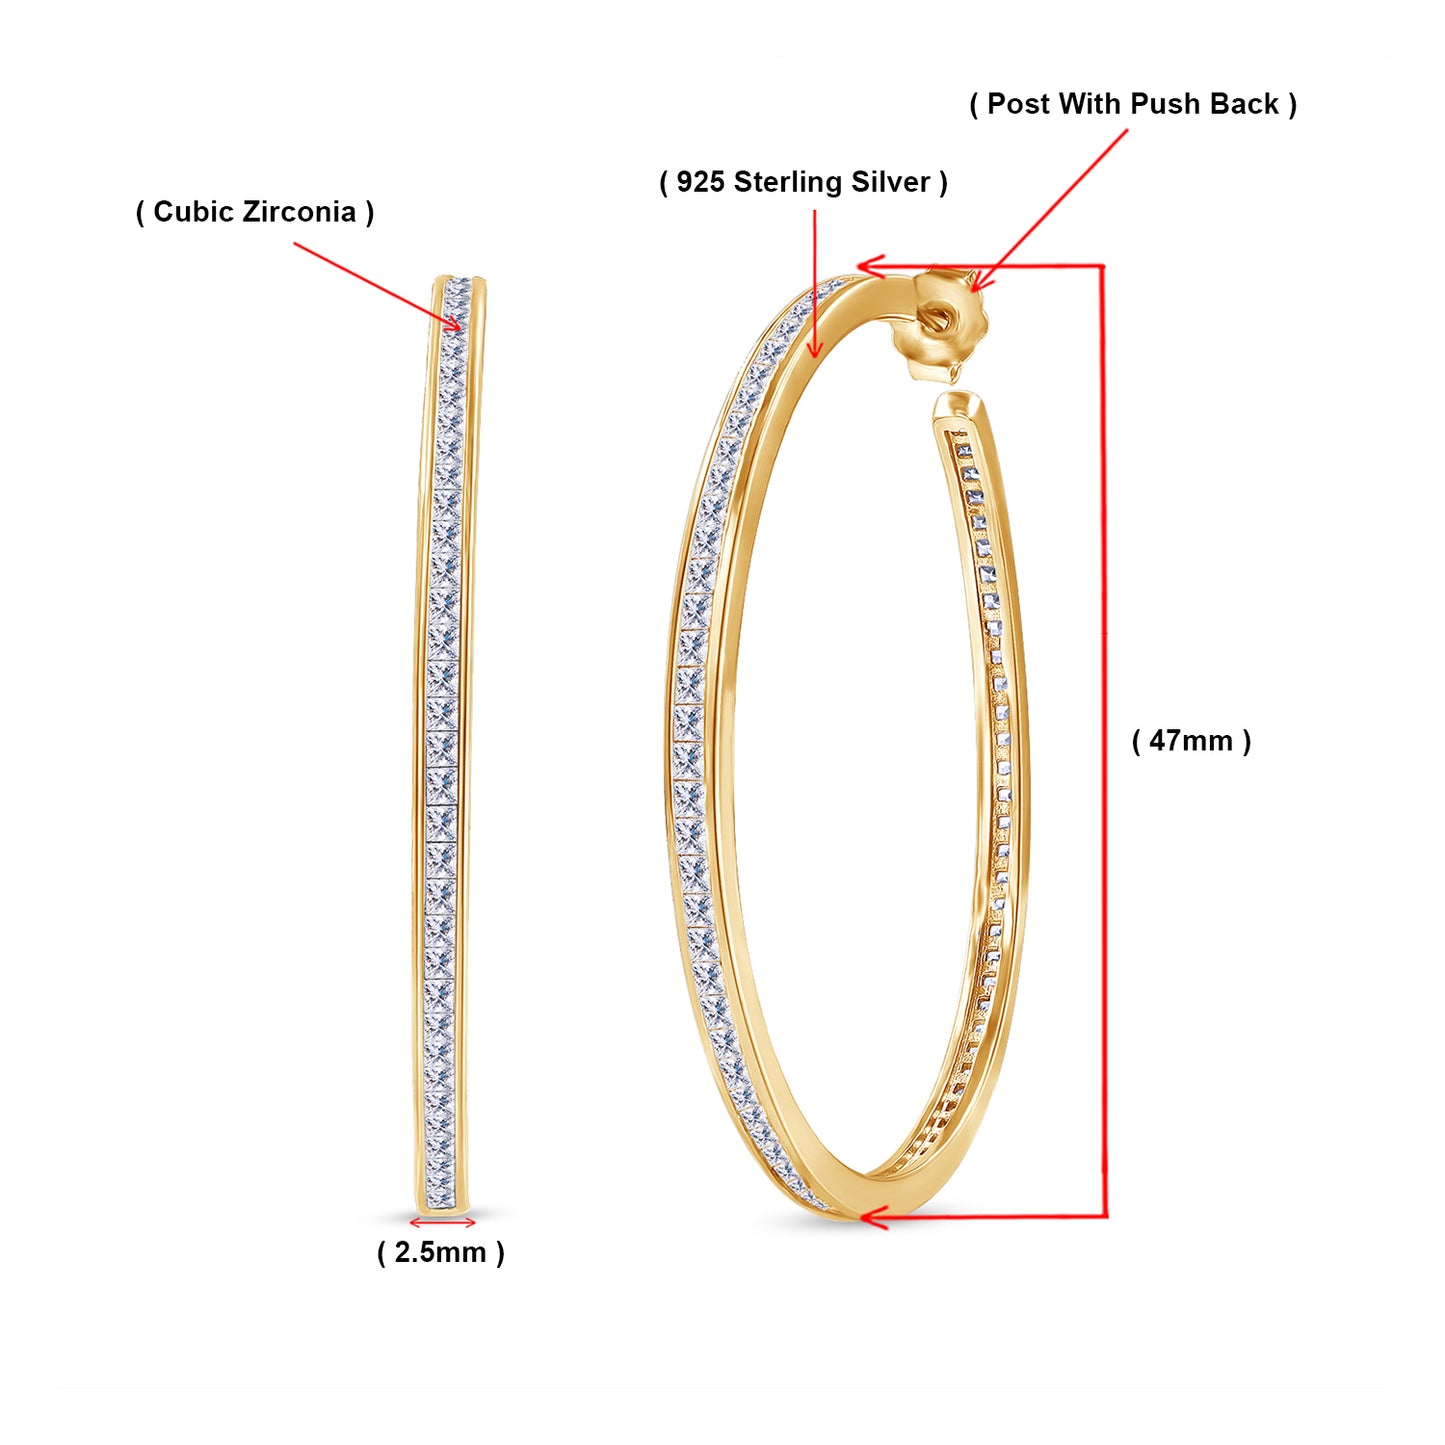 Large Hoop Earrings for Women, Princess Shape Sparkling White Cubic Zirconia Big Circle Hoops Earrings In 14K Gold Over Sterling Silver Hypoallergenic Jewelry for Sensitive Ears